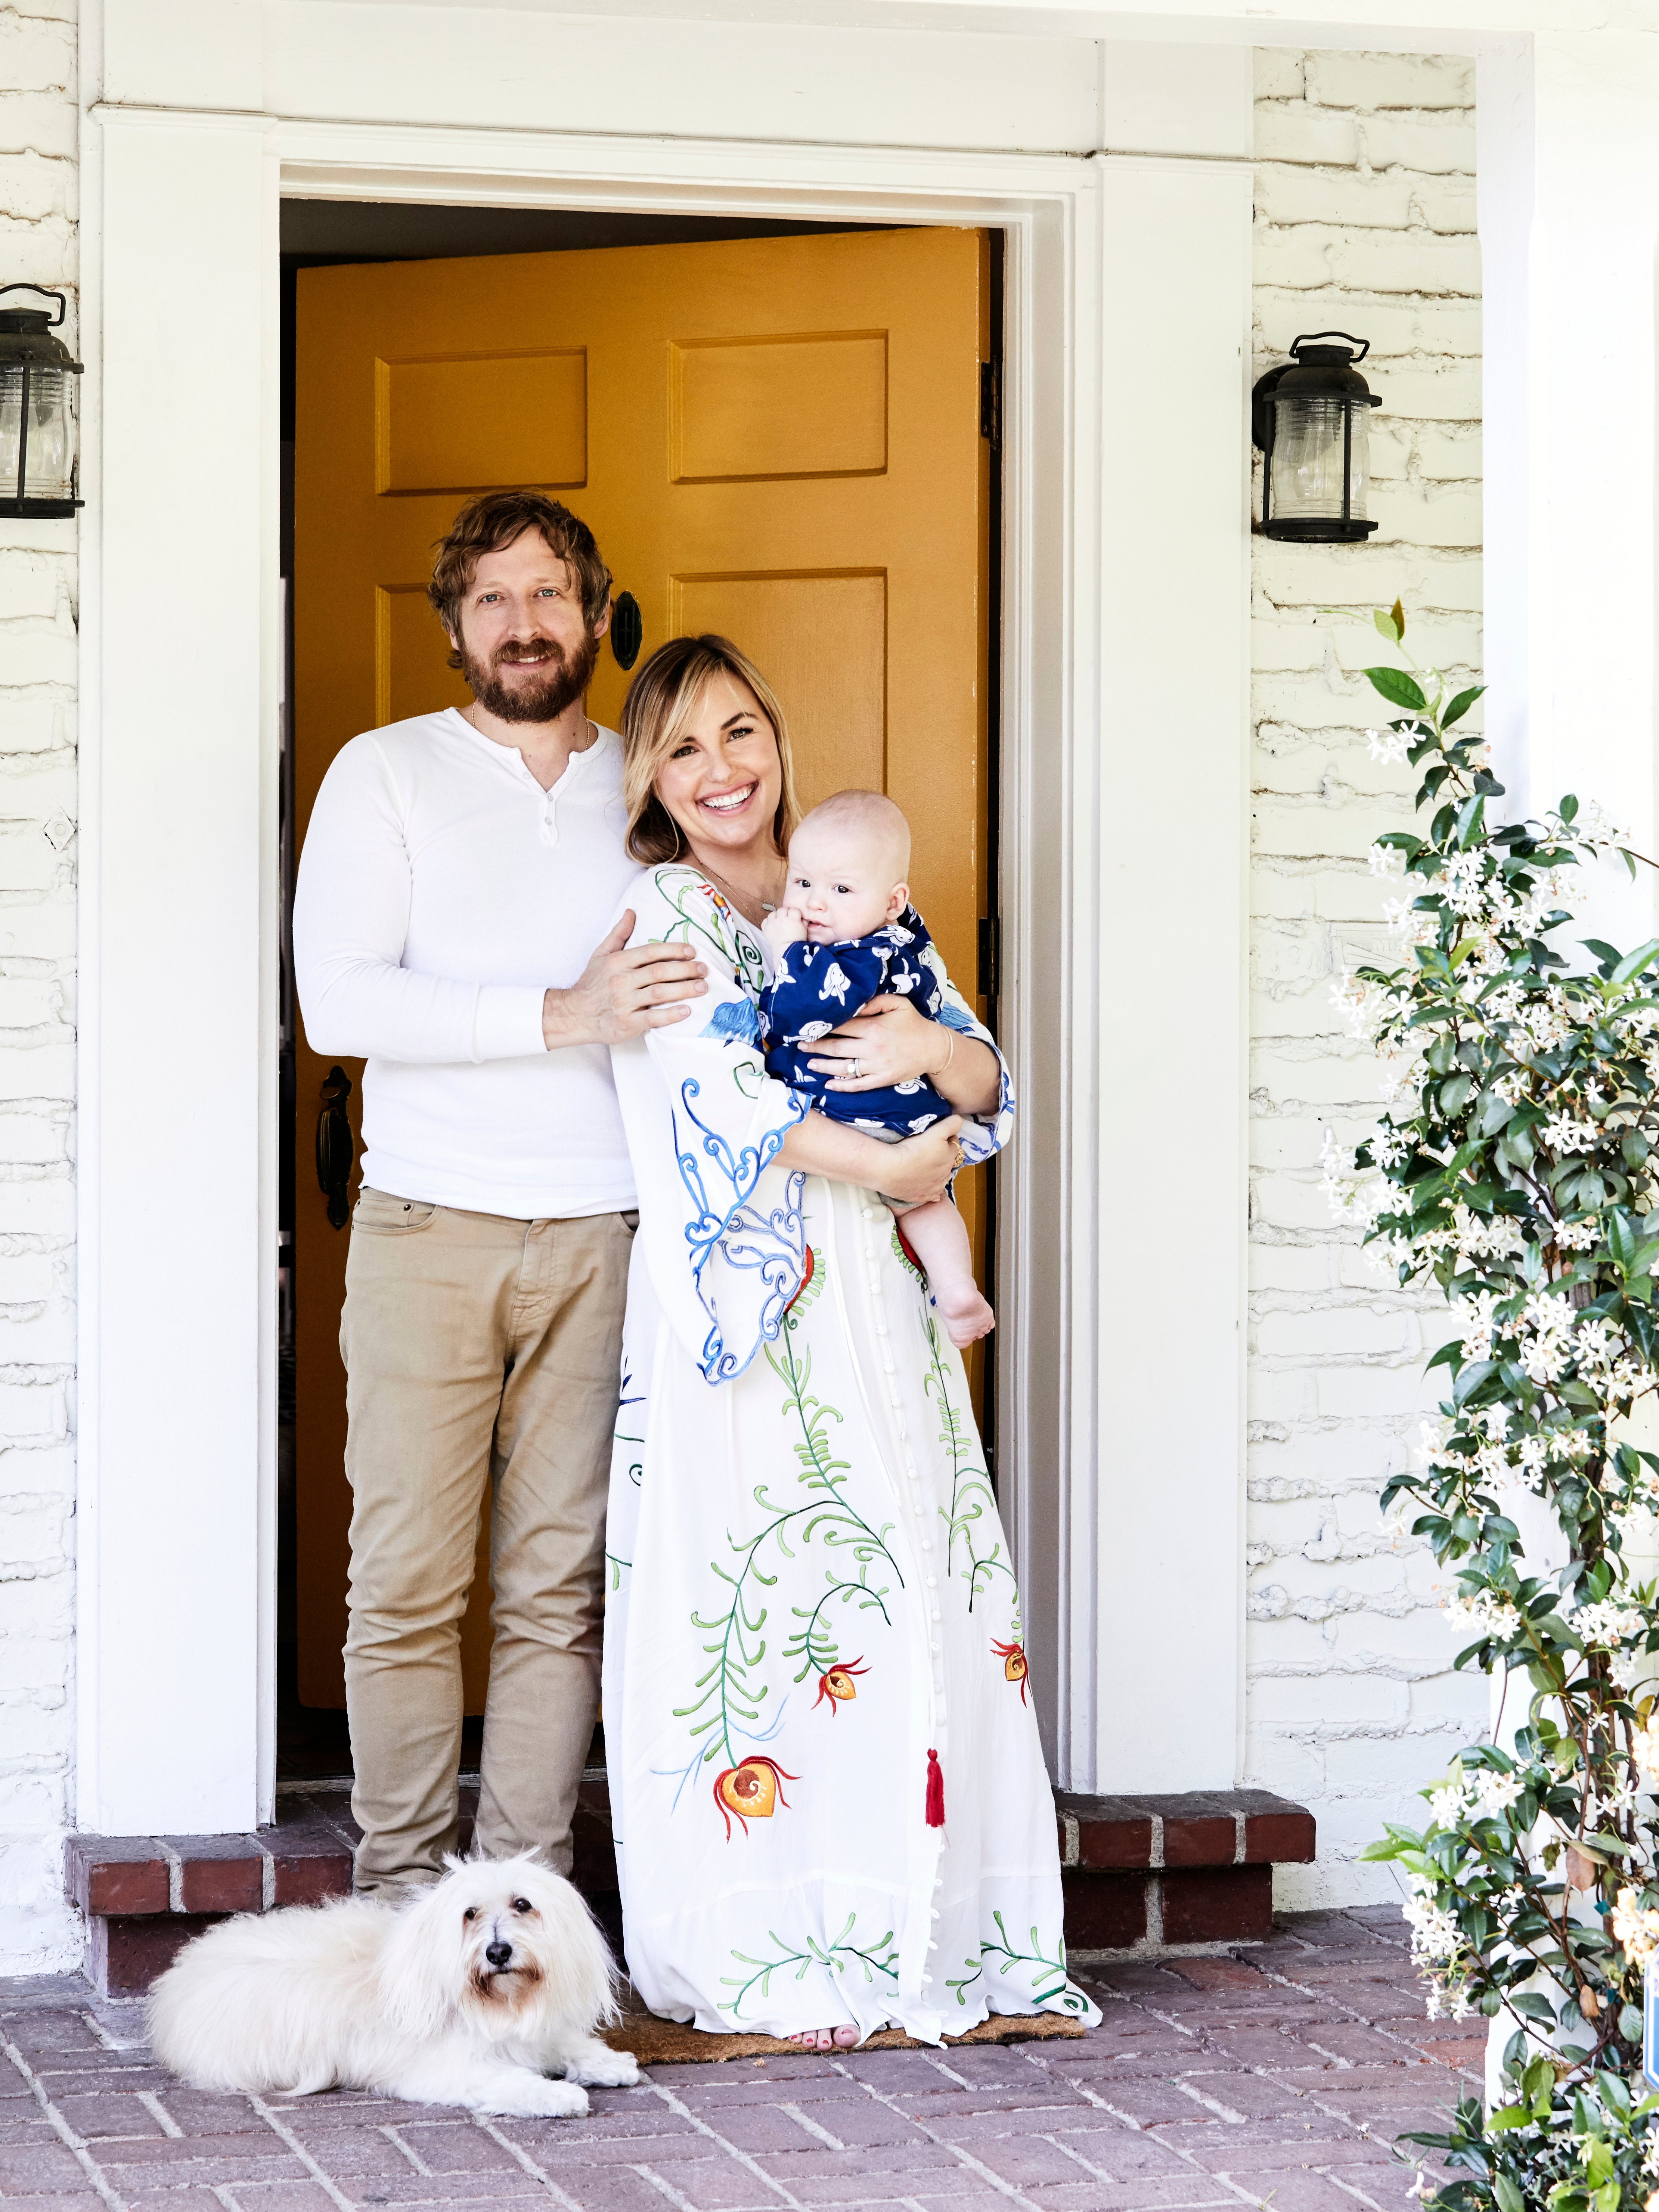 Hillary Kerr’s Silver Lake Bungalow Is a Master Class in Repurposing Vintage Finds